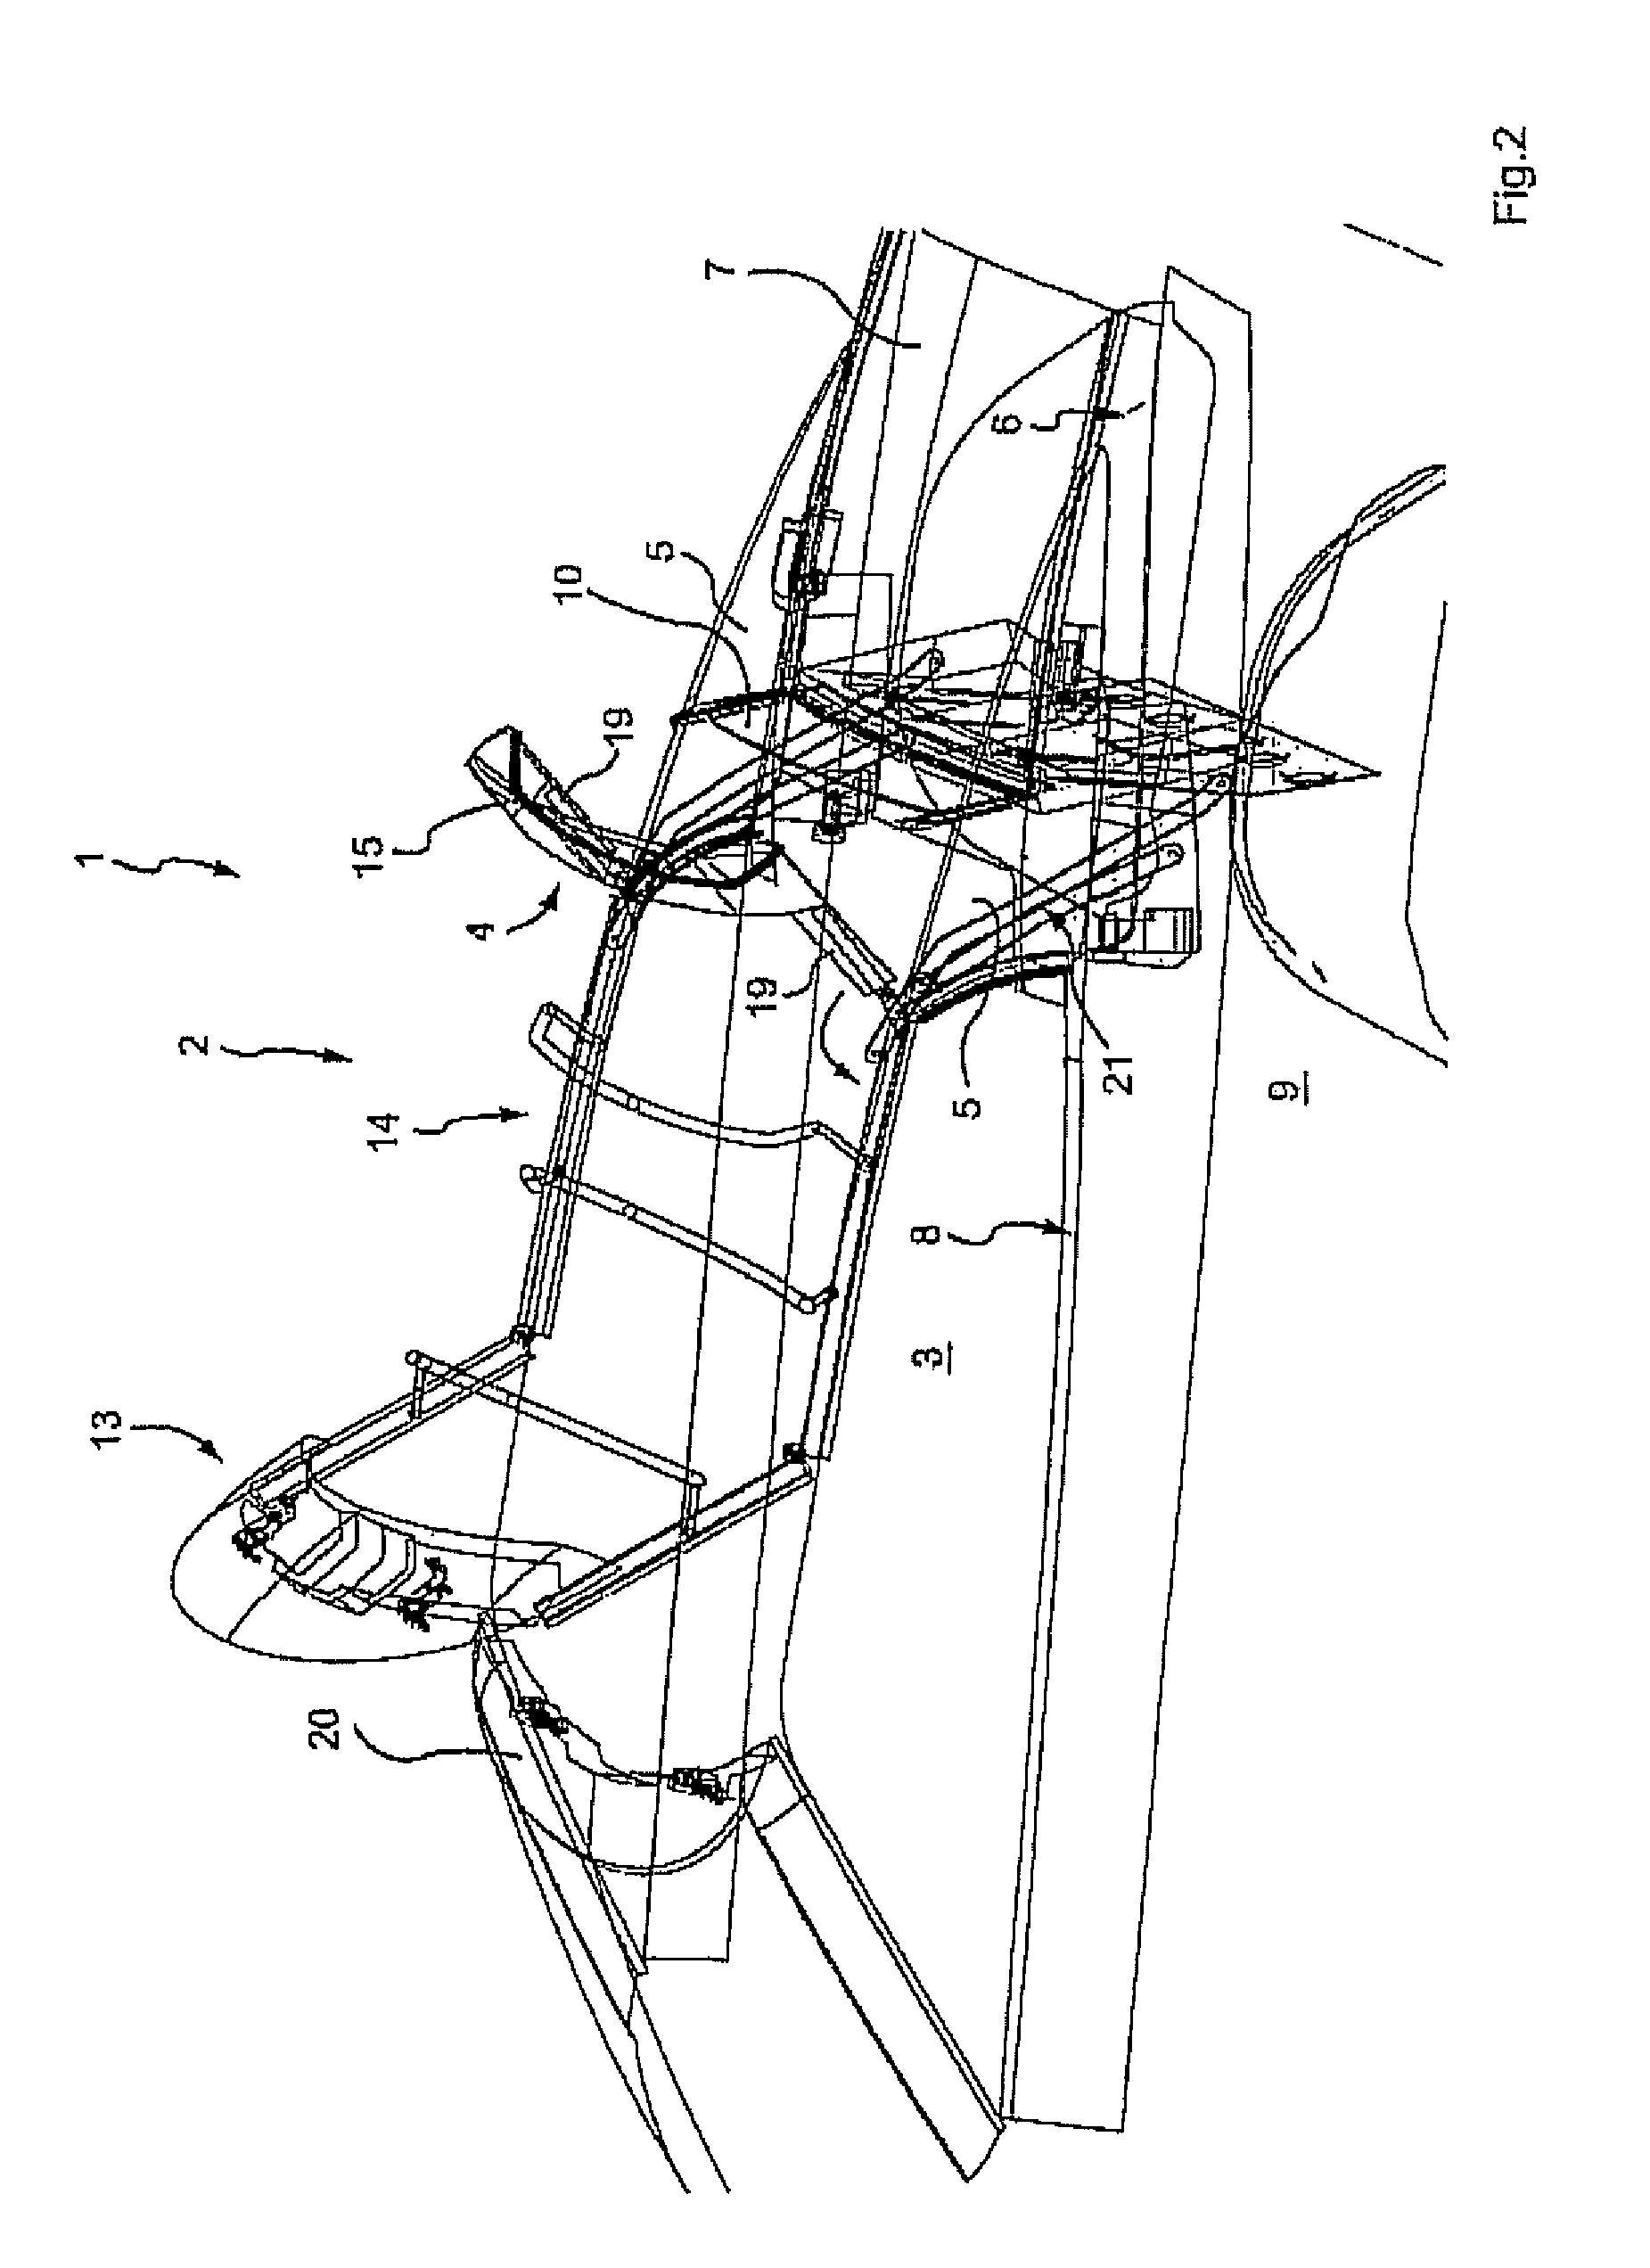 Motor vehicle having a movable roof assembly